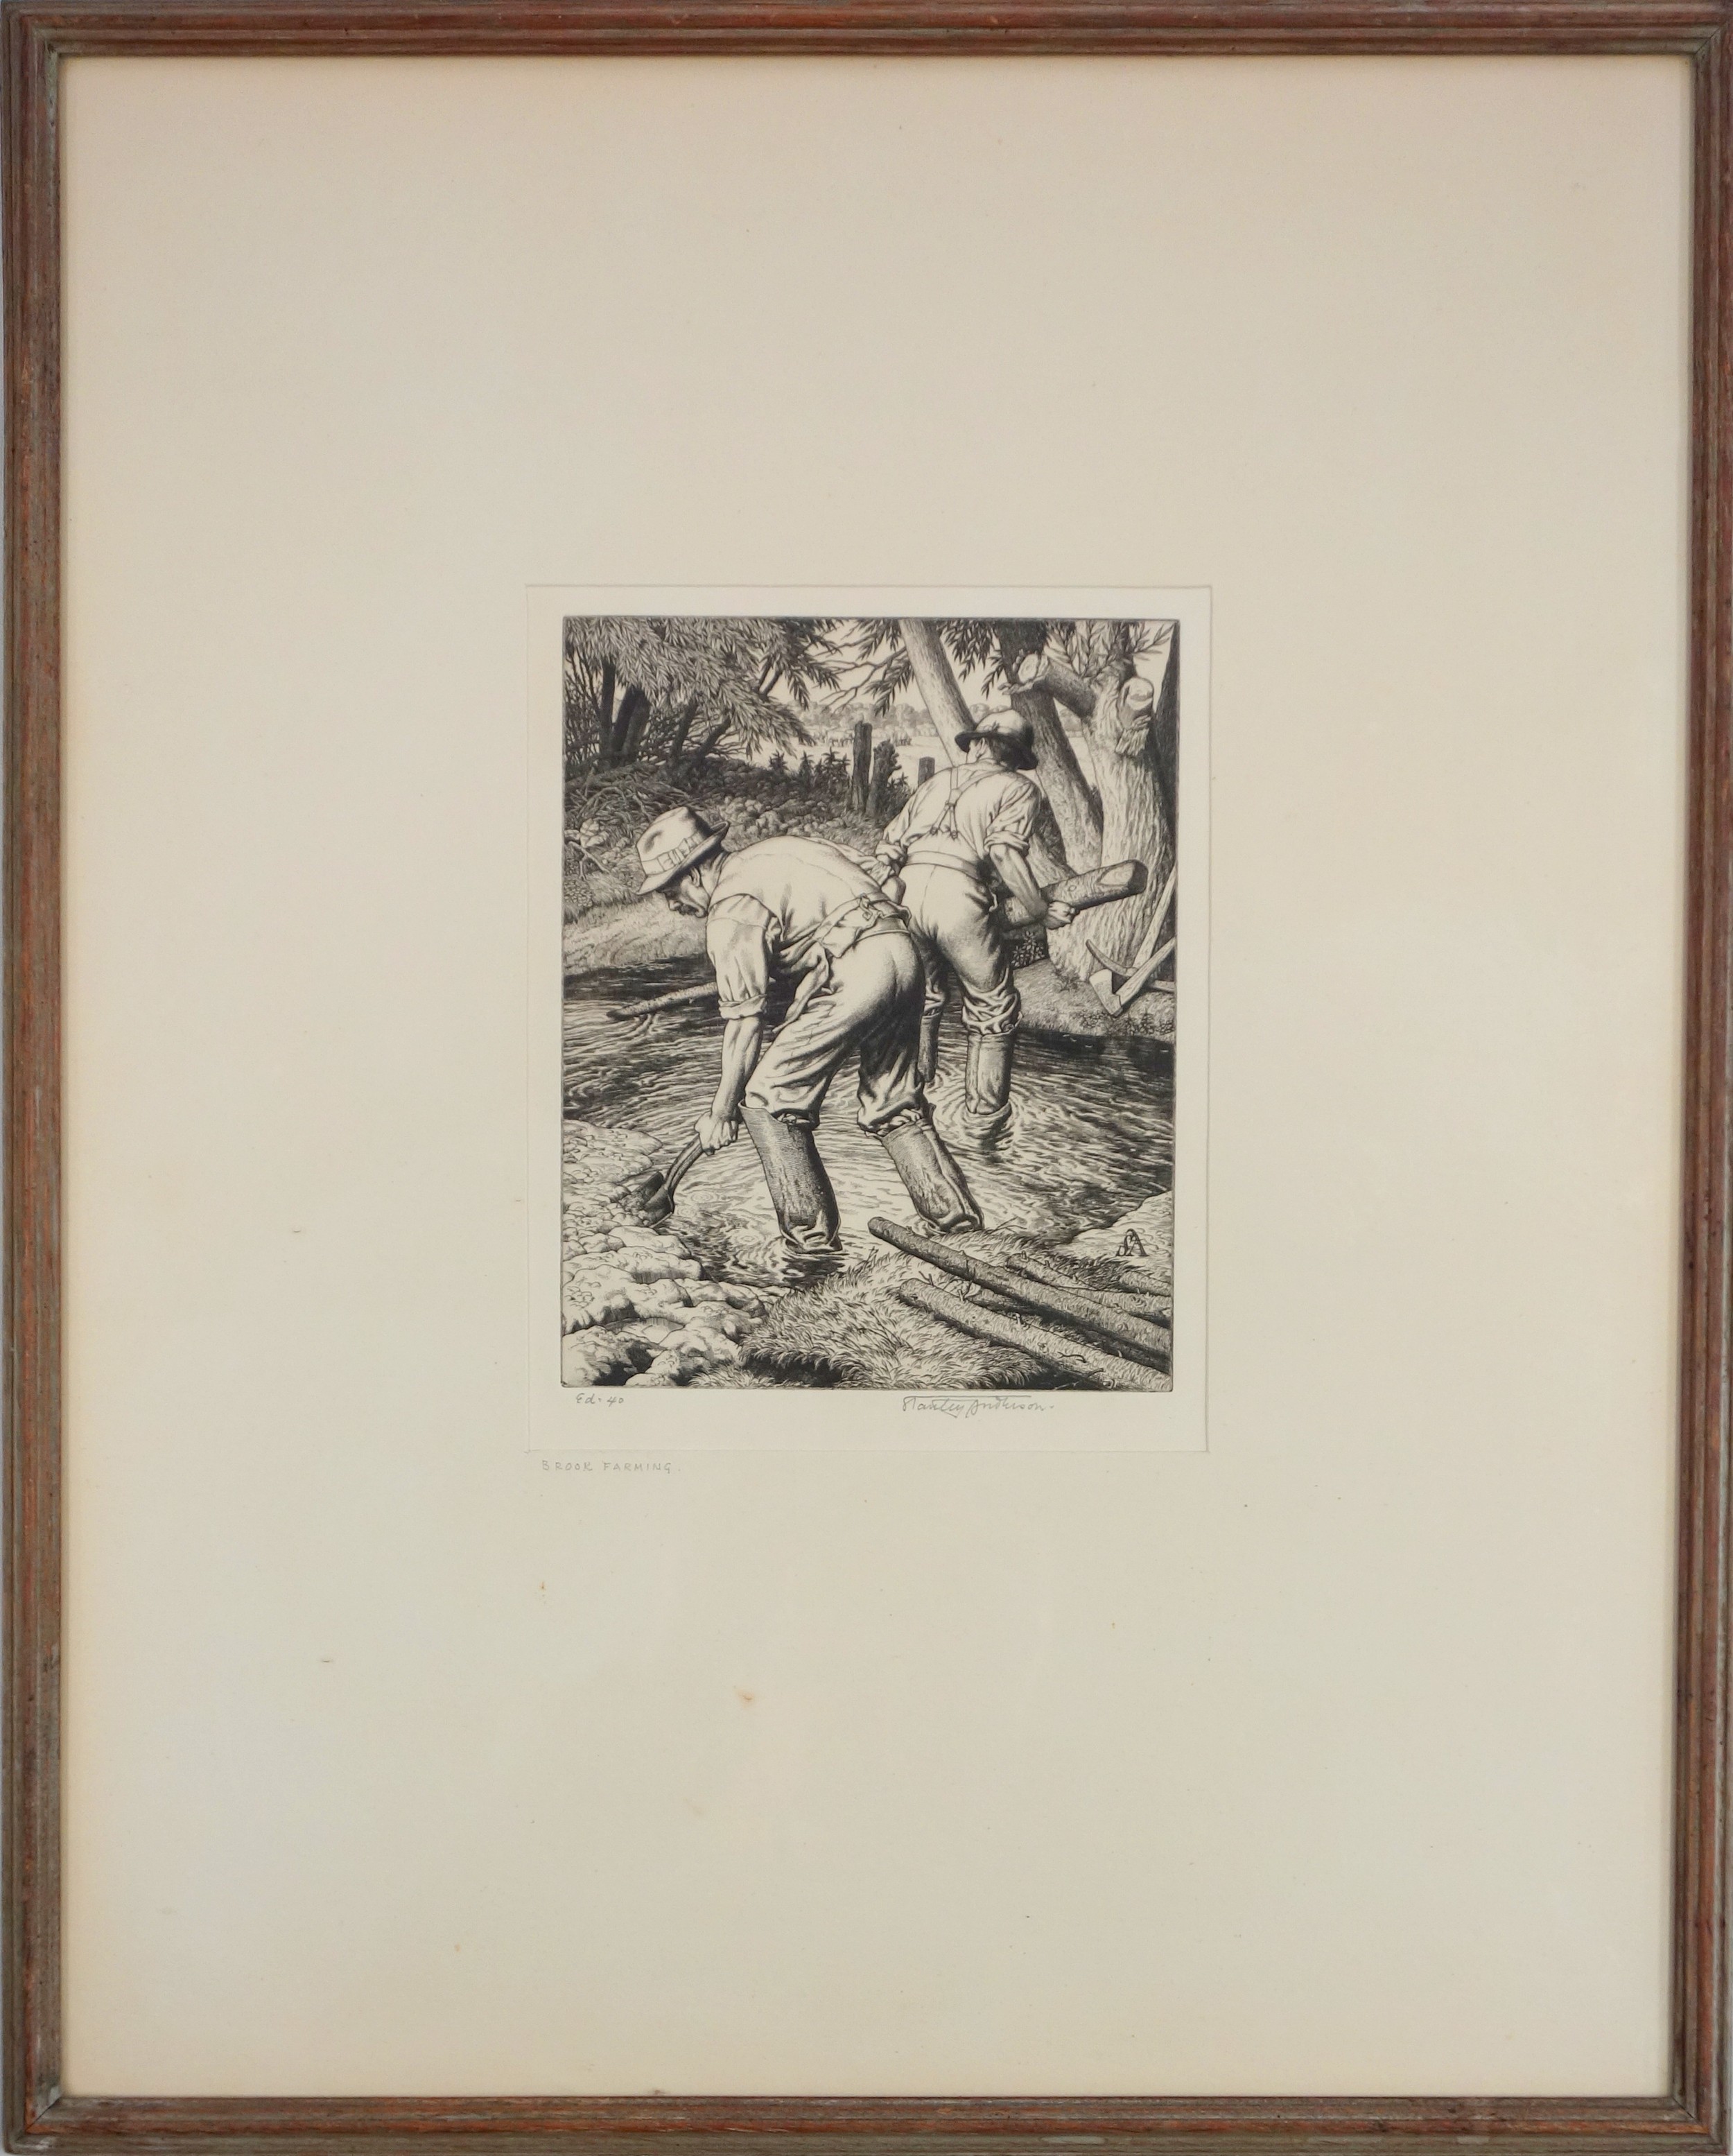 Stanley Anderson (1884-1966) 'Brook Farming', engraving, one of an edition of 40, signed, 21 x 16.